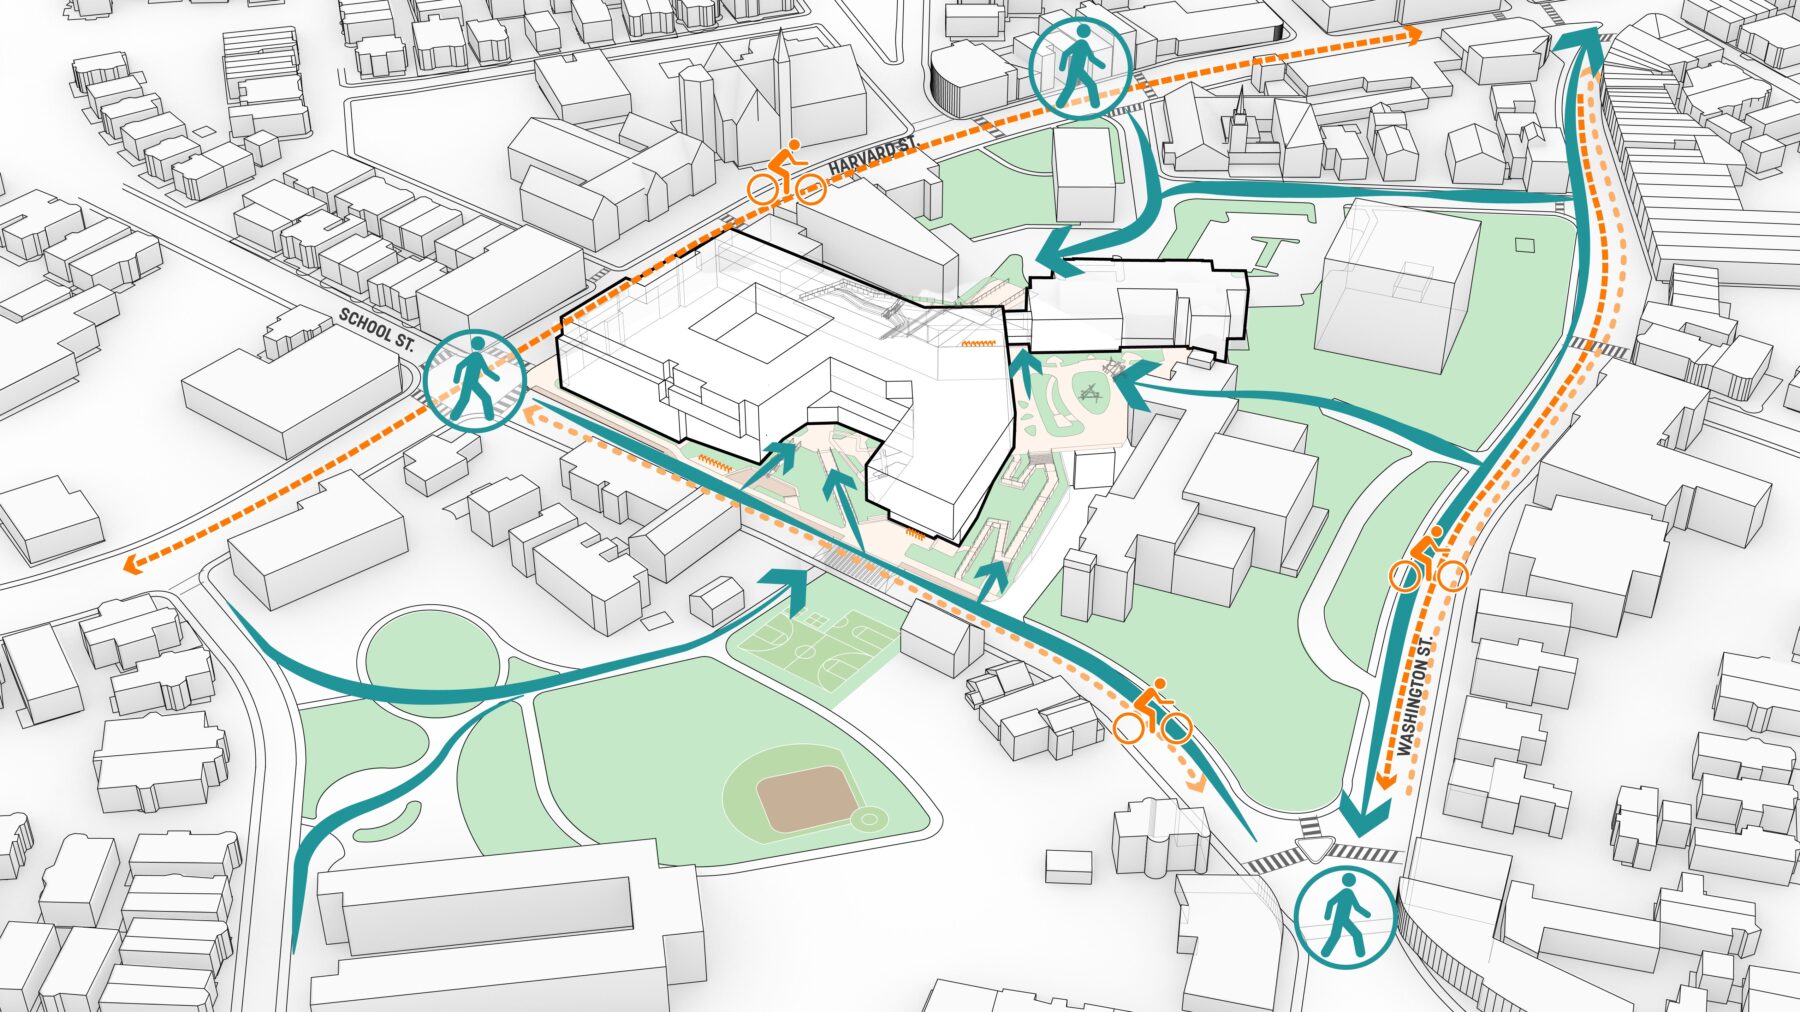 Illustrated axon diagram of school and surrounding neighborhood with arrows indicating throughways for vehicular traffic